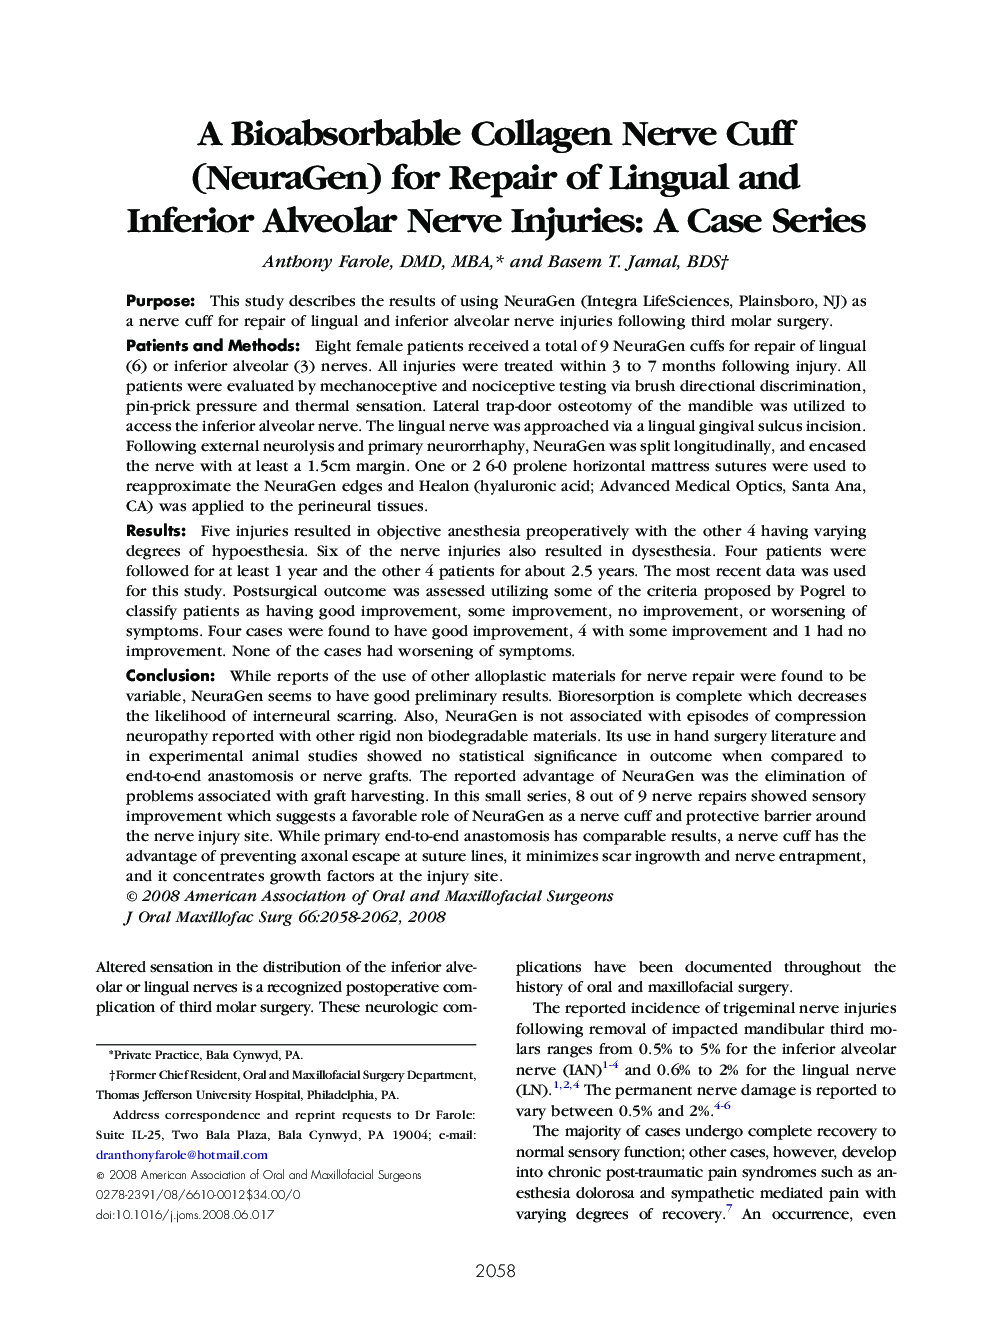 A Bioabsorbable Collagen Nerve Cuff (NeuraGen) for Repair of Lingual and Inferior Alveolar Nerve Injuries: A Case Series